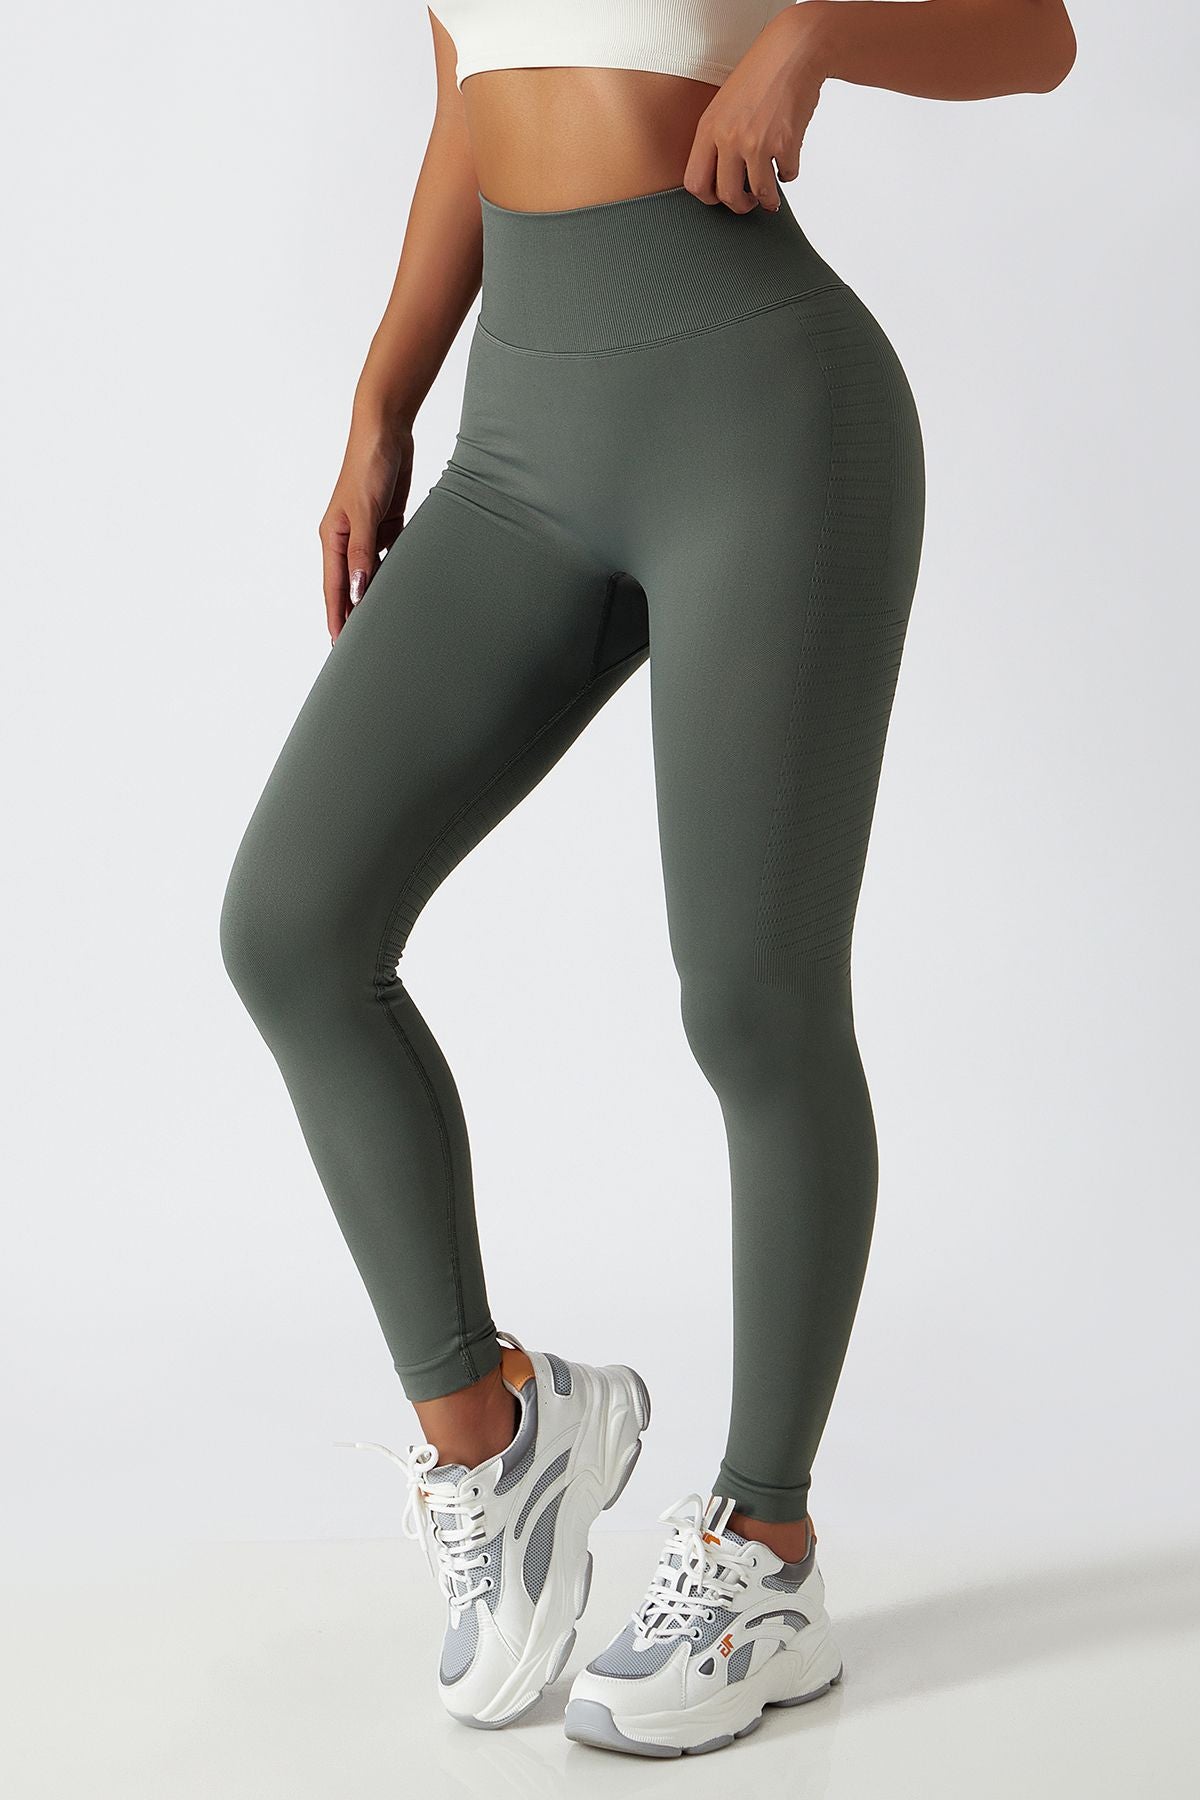 Kami Luckey No Cameltoe No Front Seam Seamless High Waisted Compression  Leggings with Pockets for Women (7/8 Solid Color Workout Tights), Dl064  Piquant Green, 14 : : Fashion